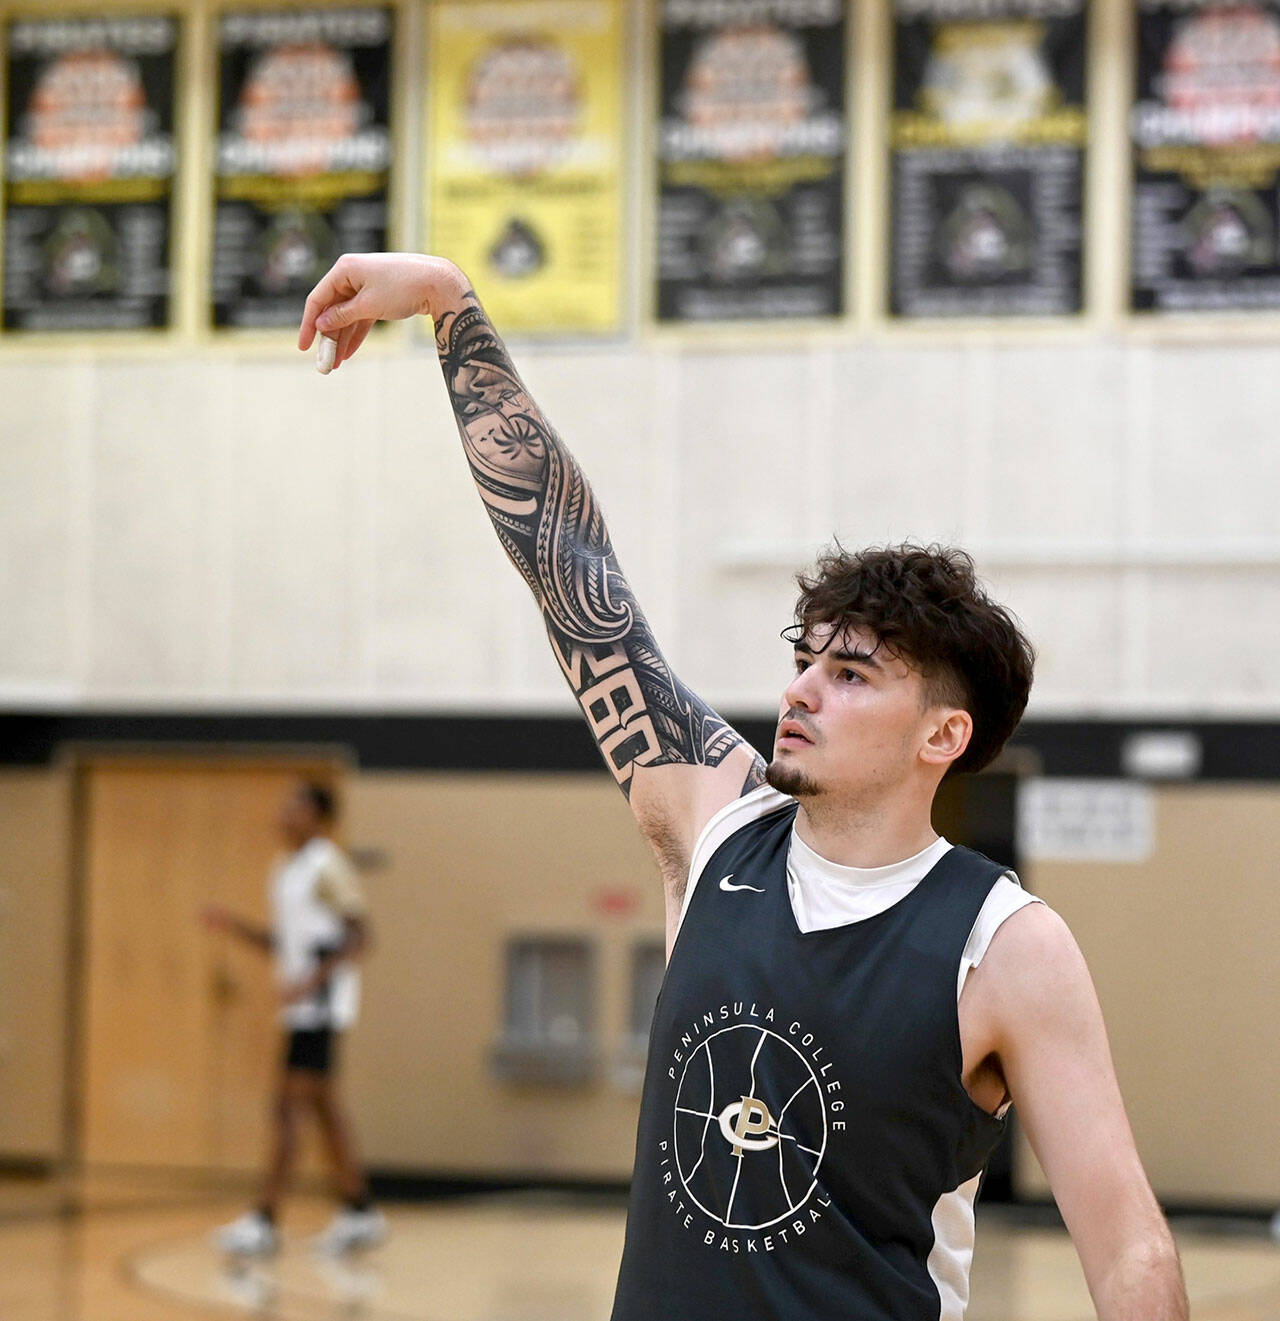 Peninsula sophomore Aiden Olmstead follows through on a jump shot during a recent practice. Olmstead saw action as a freshman with the Pirates before an injury cut his 2022-23 season short.